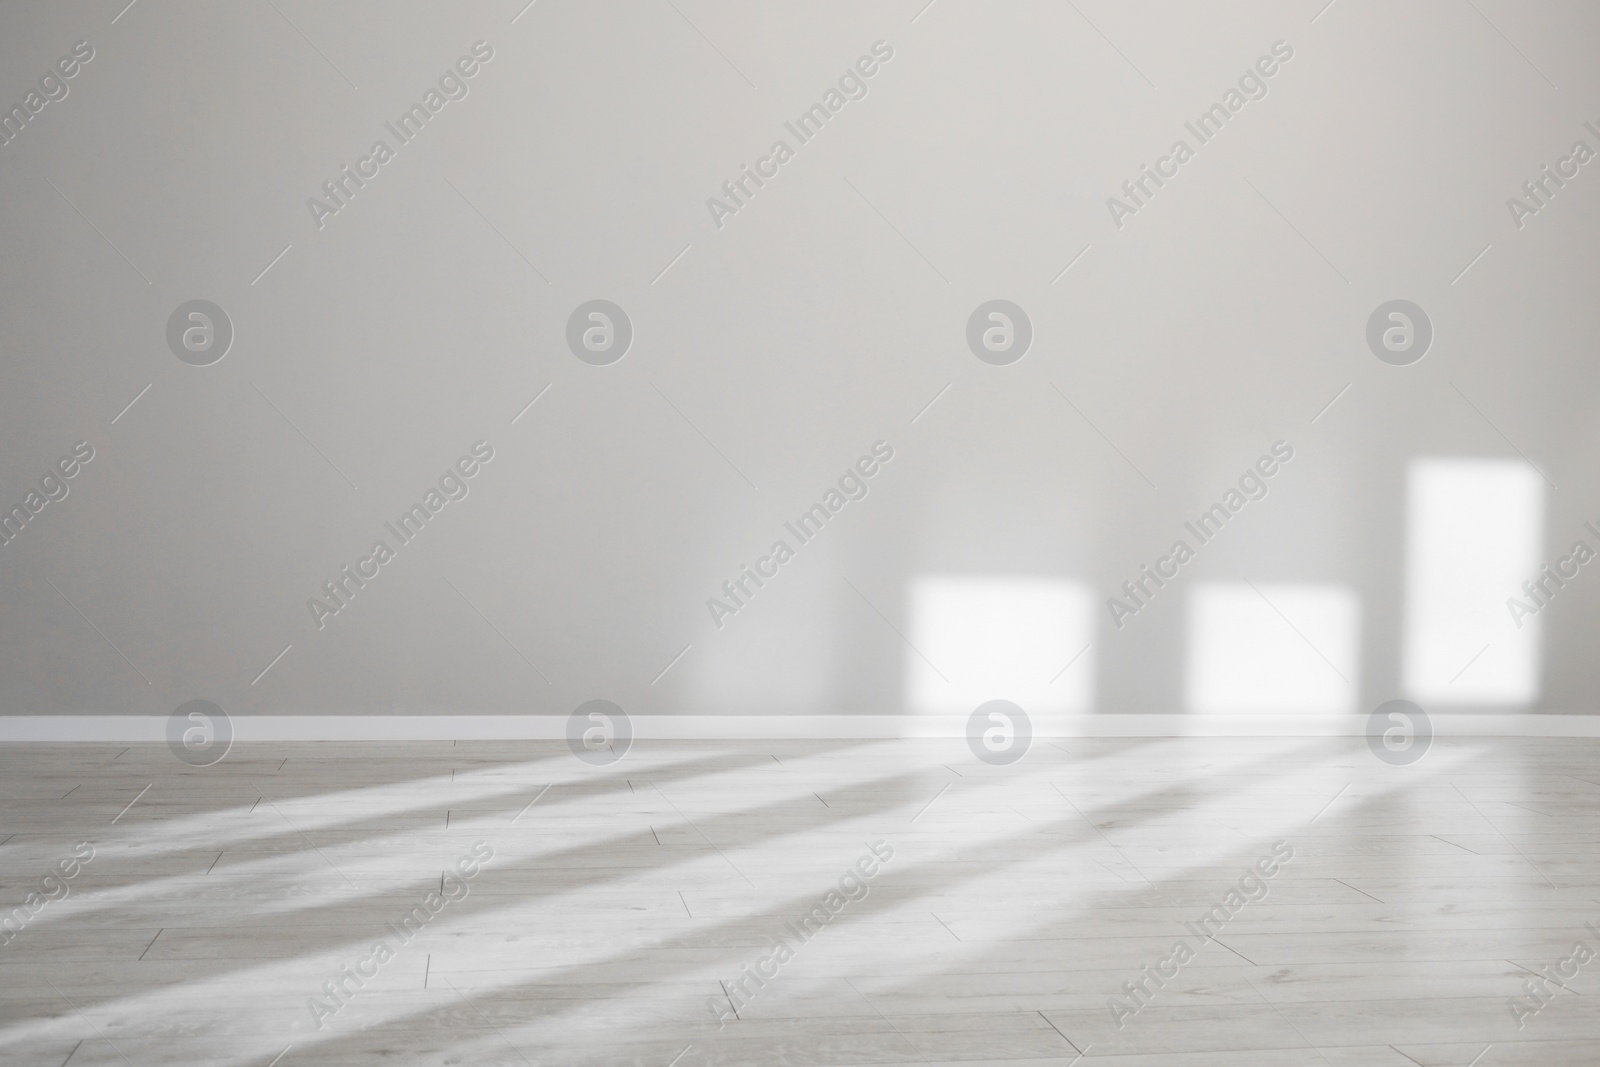 Photo of Light and shadows from window on floor and wall indoors